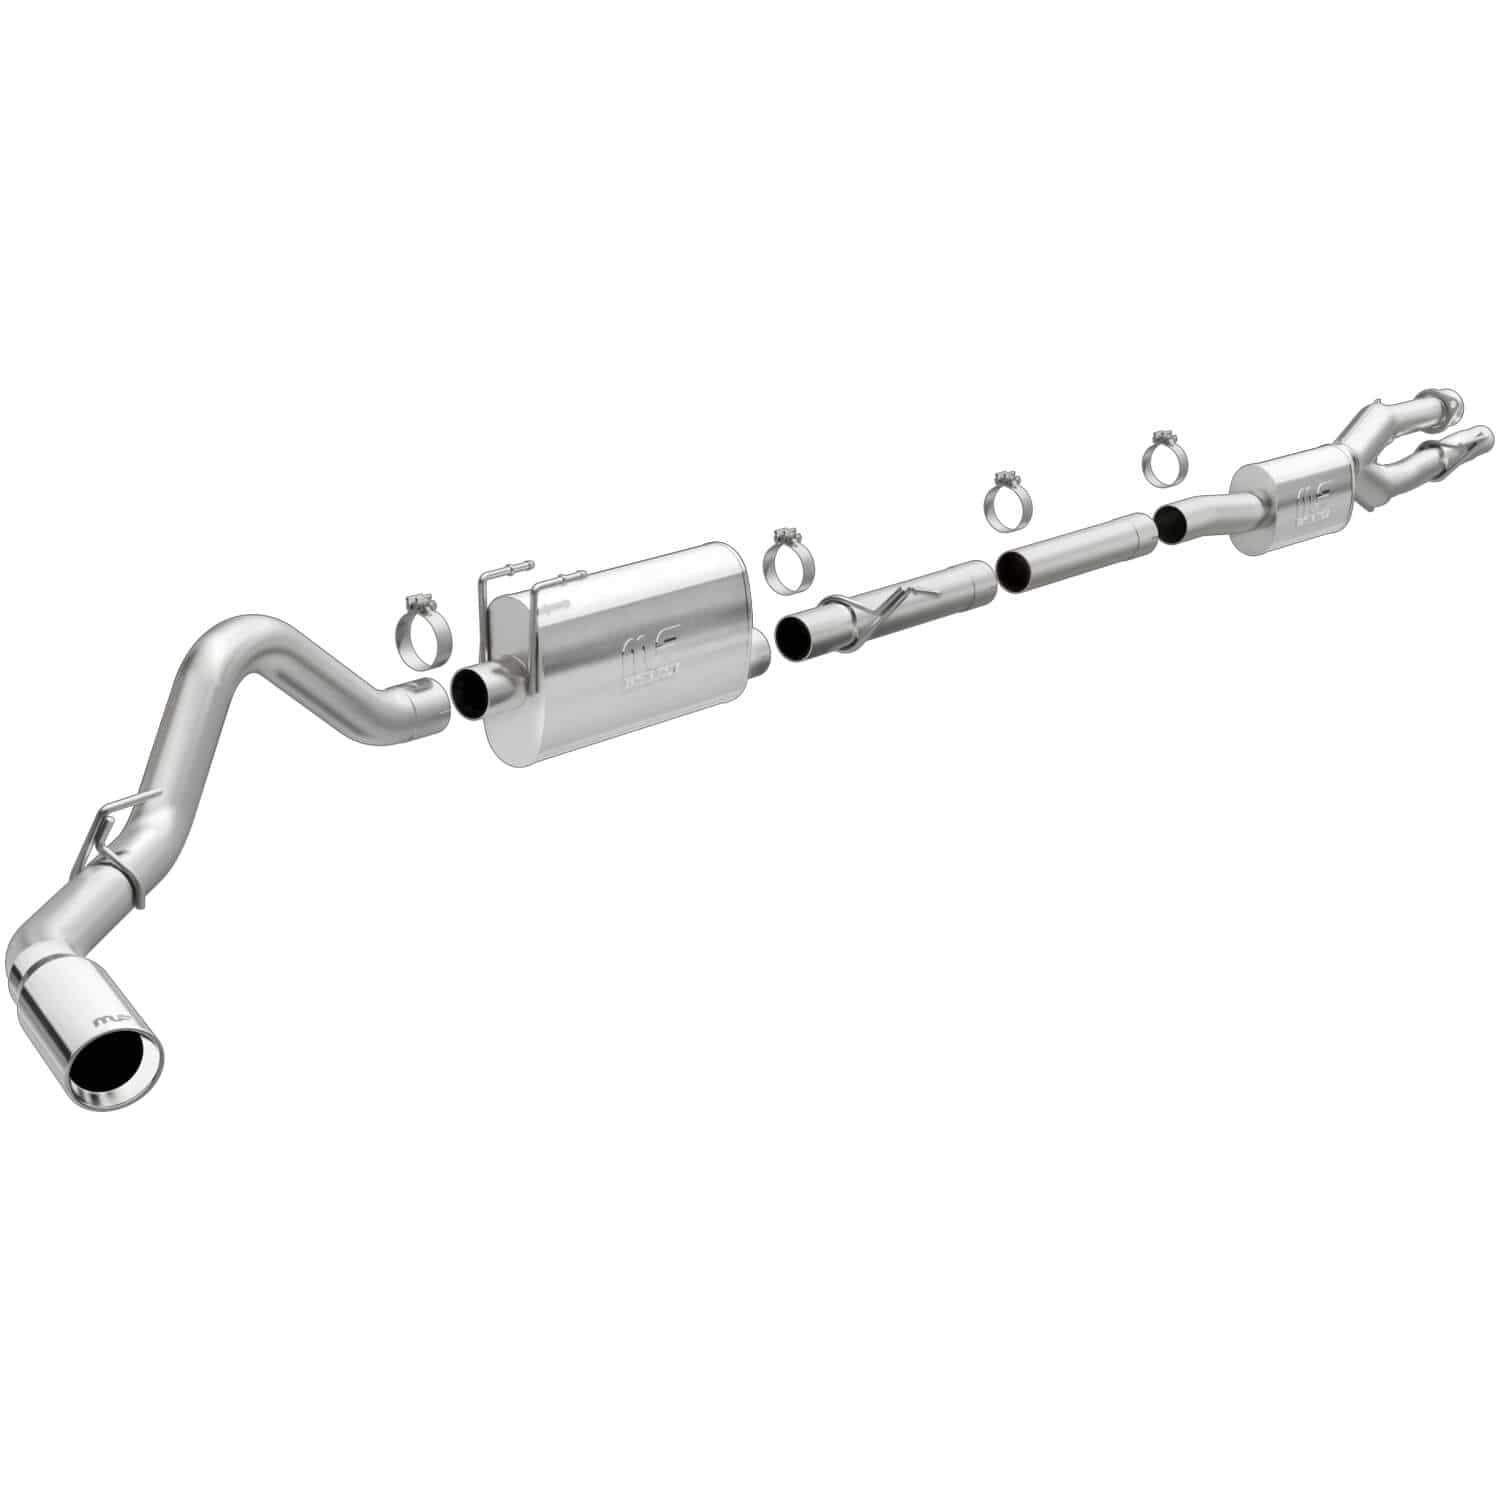 Magnaflow Street Series Cat-Back for Ford F-360 V8 7.3L 2020-21 | #19530MF.  Available from NEMESISUK.COM